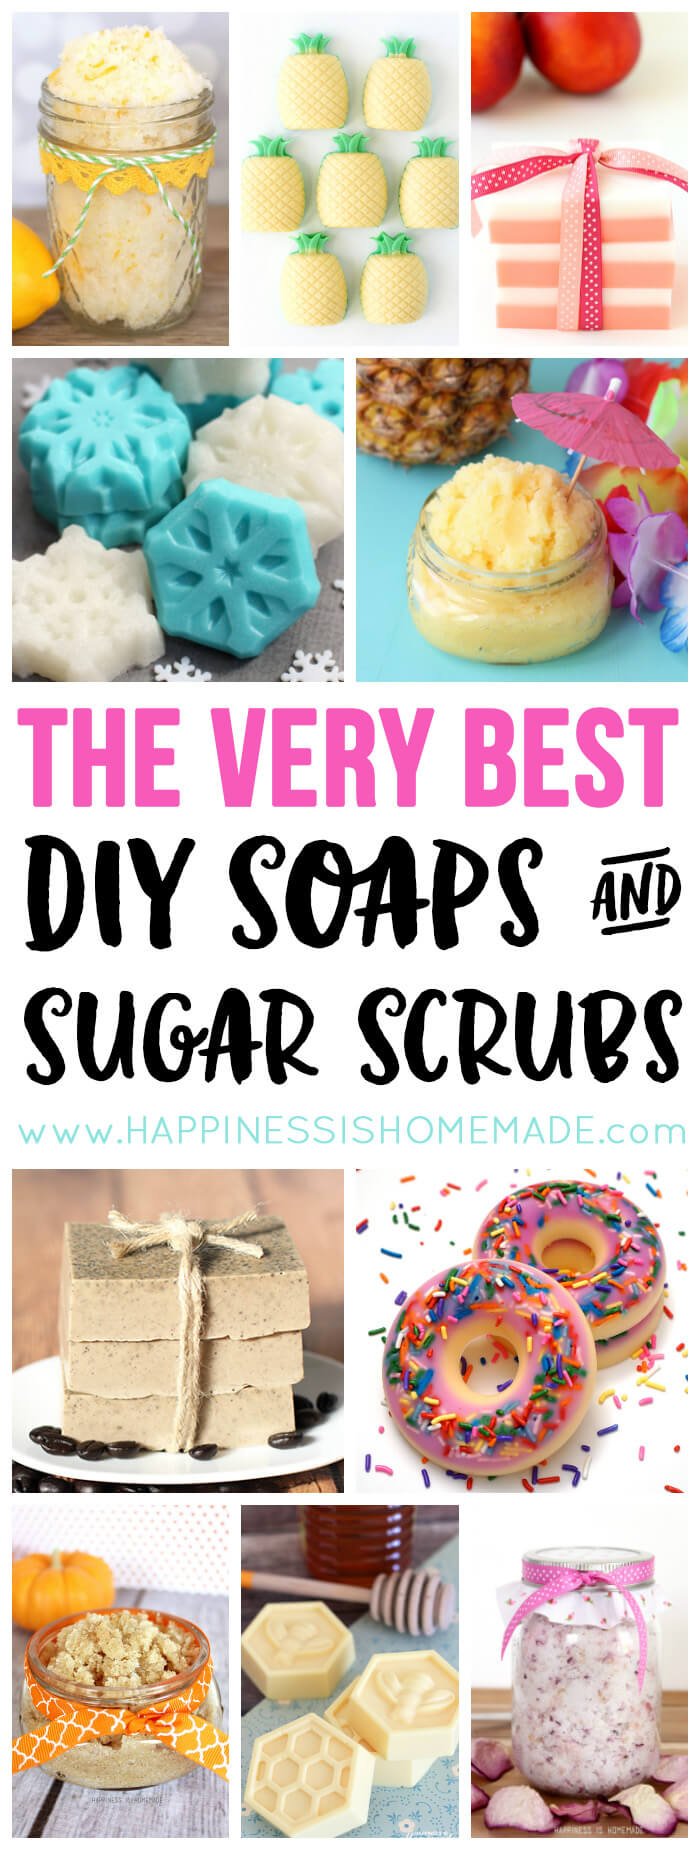 https://www.happinessishomemade.net/wp-content/uploads/2016/09/The-Very-Best-DIY-Soaps-and-Sugar-Scrub-Recipes.jpg